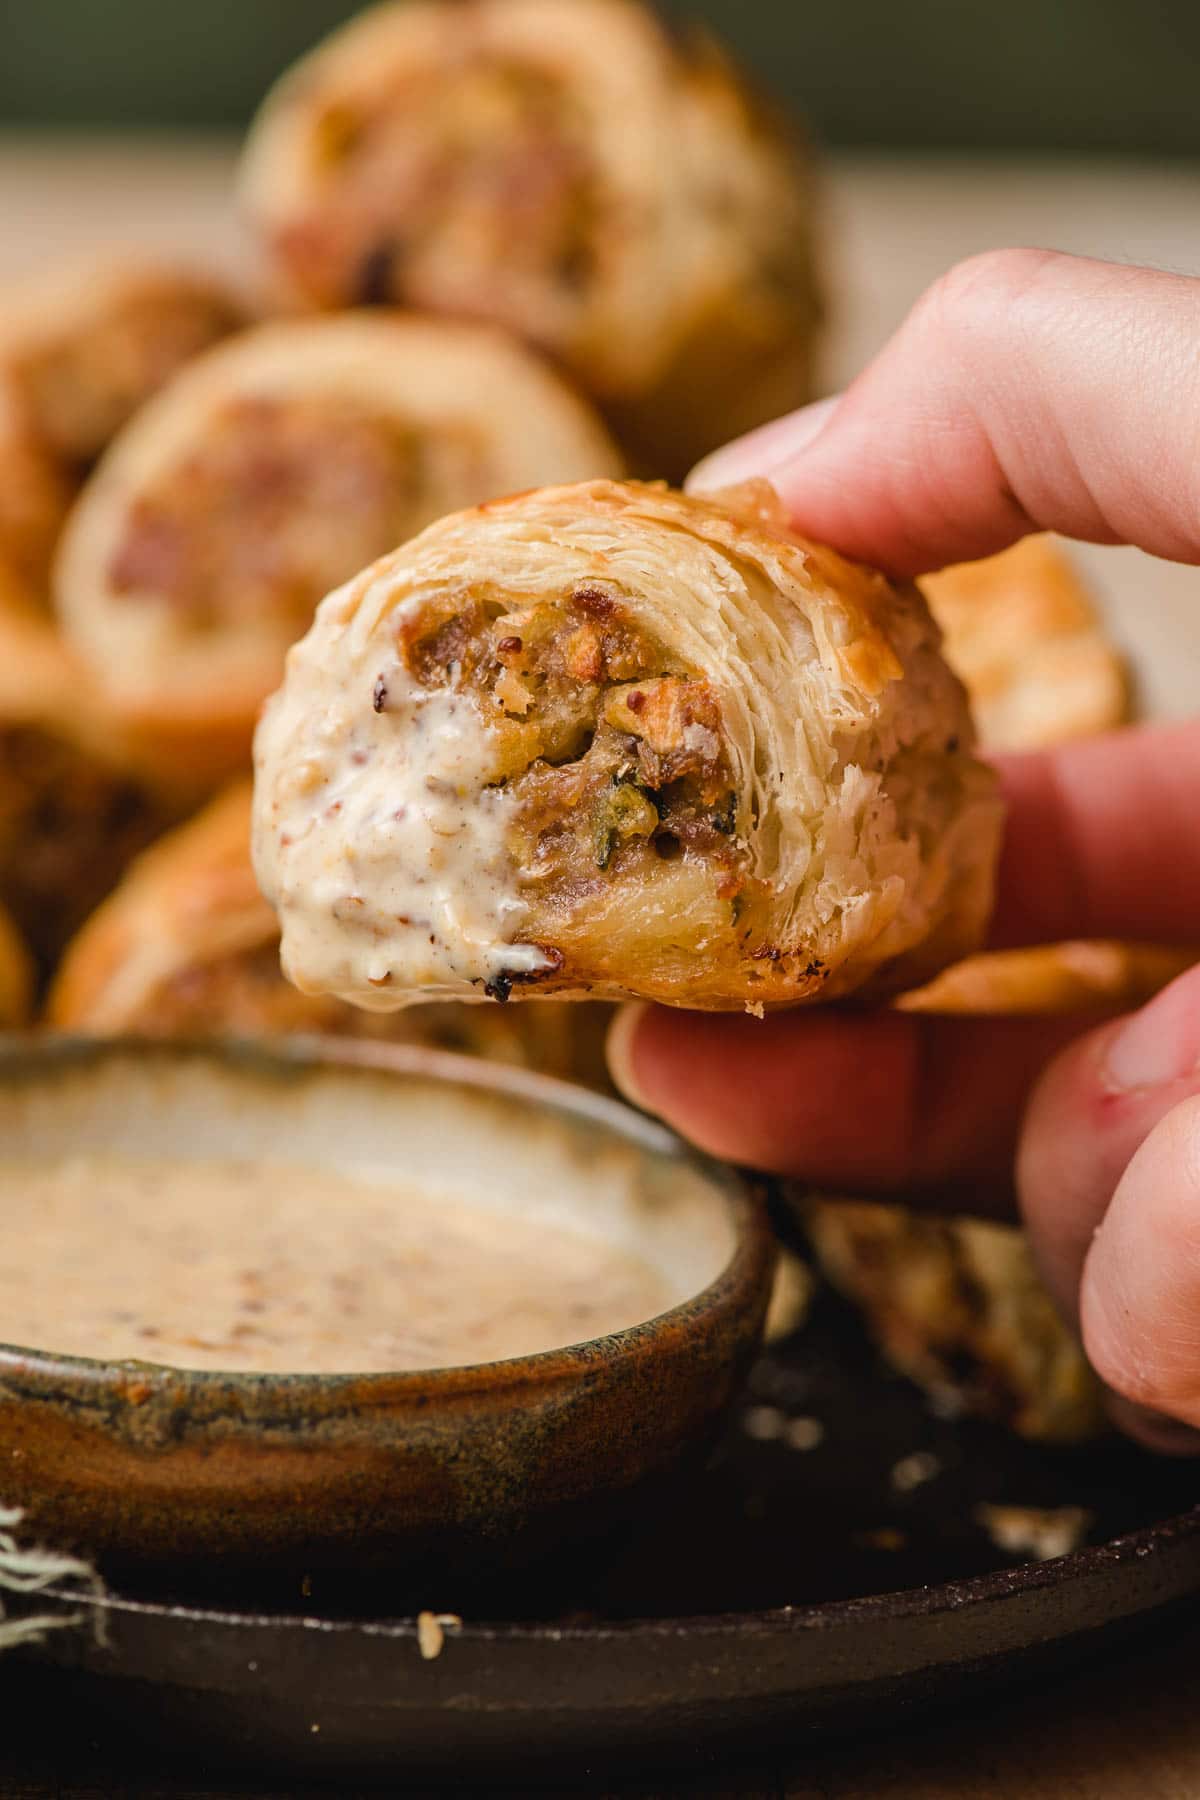 Sausage roll dipped in a bowl of mustard sauce.